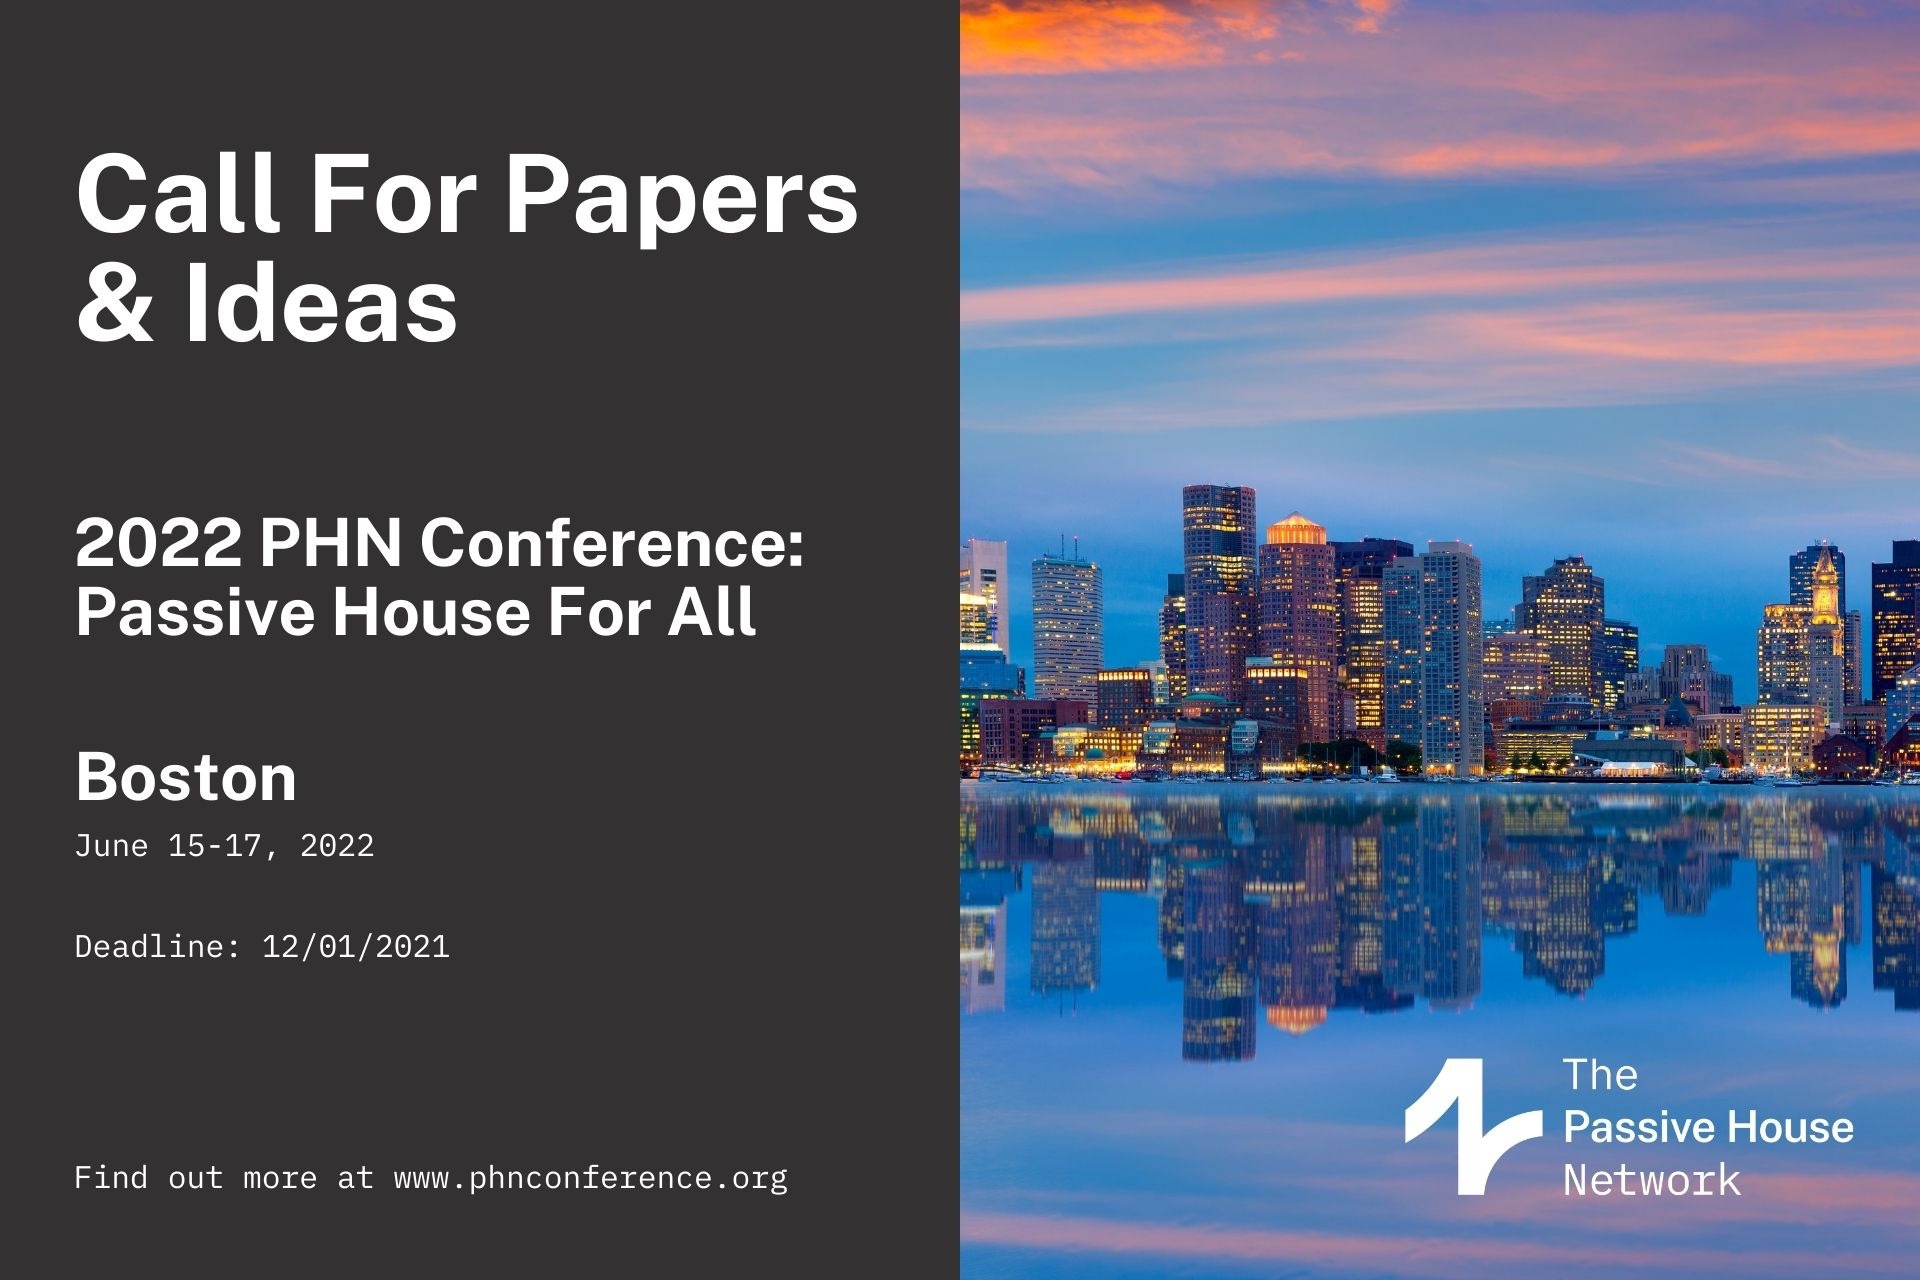 The Passive House Network Announces Call for Papers & Ideas for 2022 National Conference